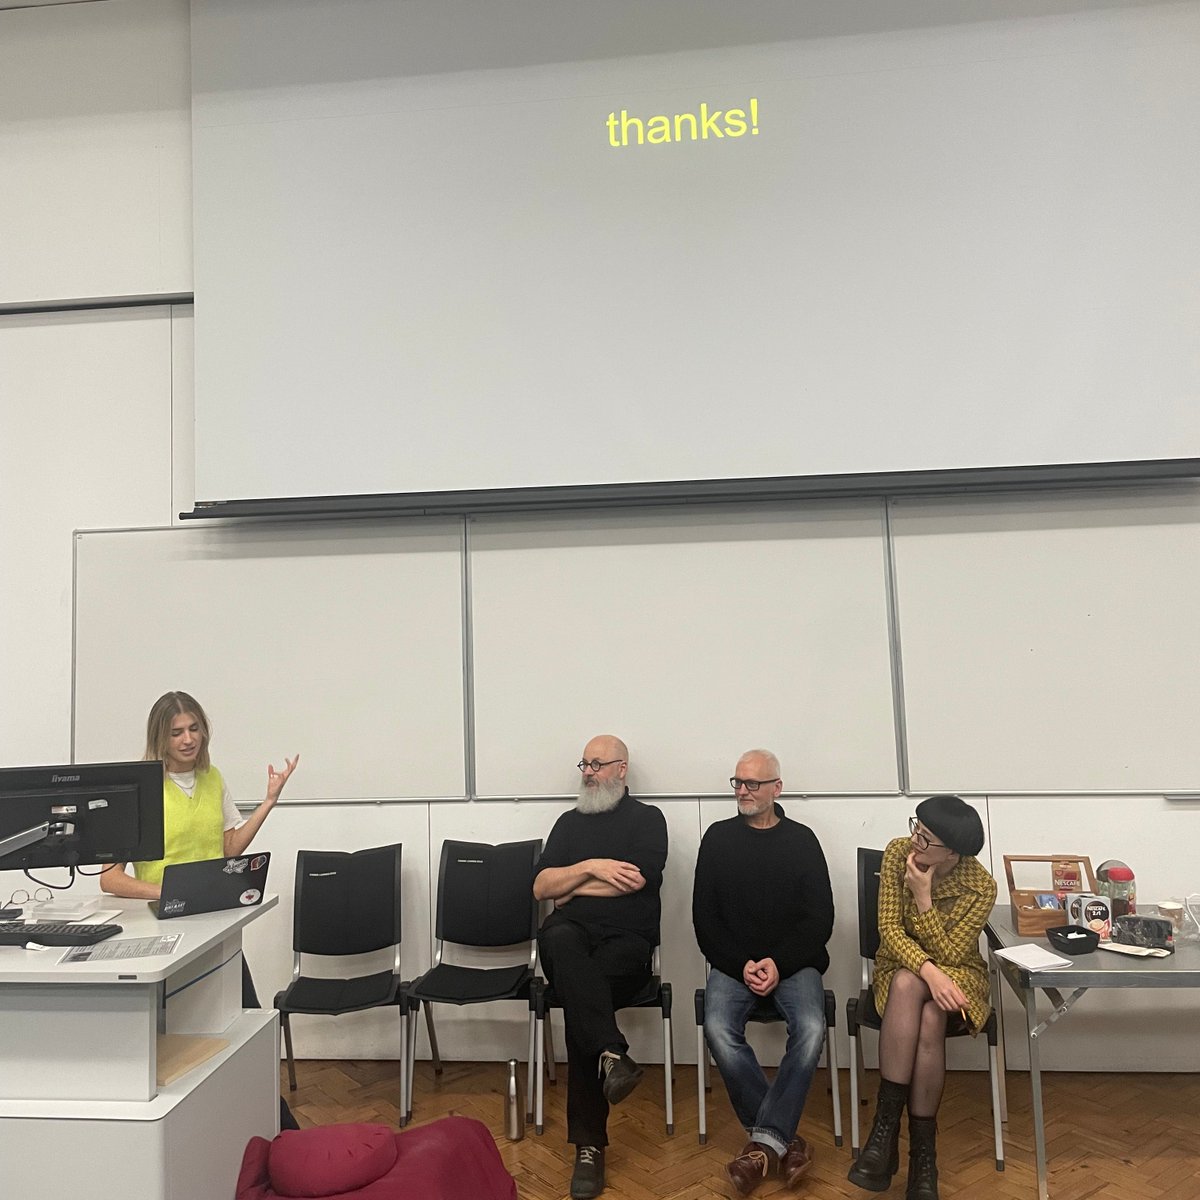 @SotonEnglish @sarahkatehayden @sarahjaybrowne thanks! 🦓🍋📽️

with final conversation from Matt West, @tobylitt @sarahkatehayden @emily_baker18, on practicing and performing idleness, and its potential for radical change